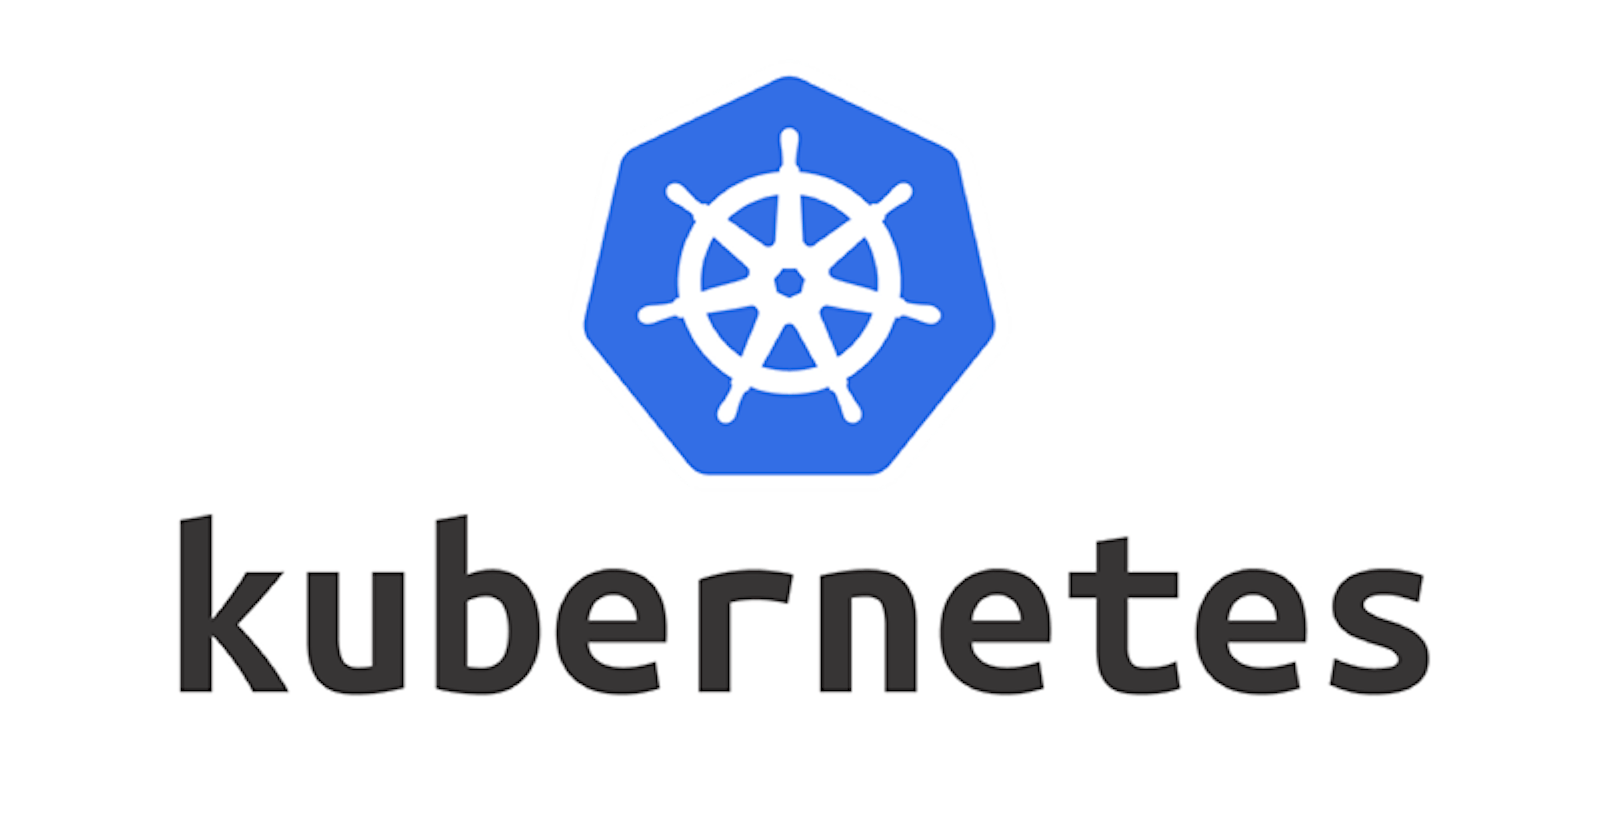 Origin and Introduction to Kubernetes